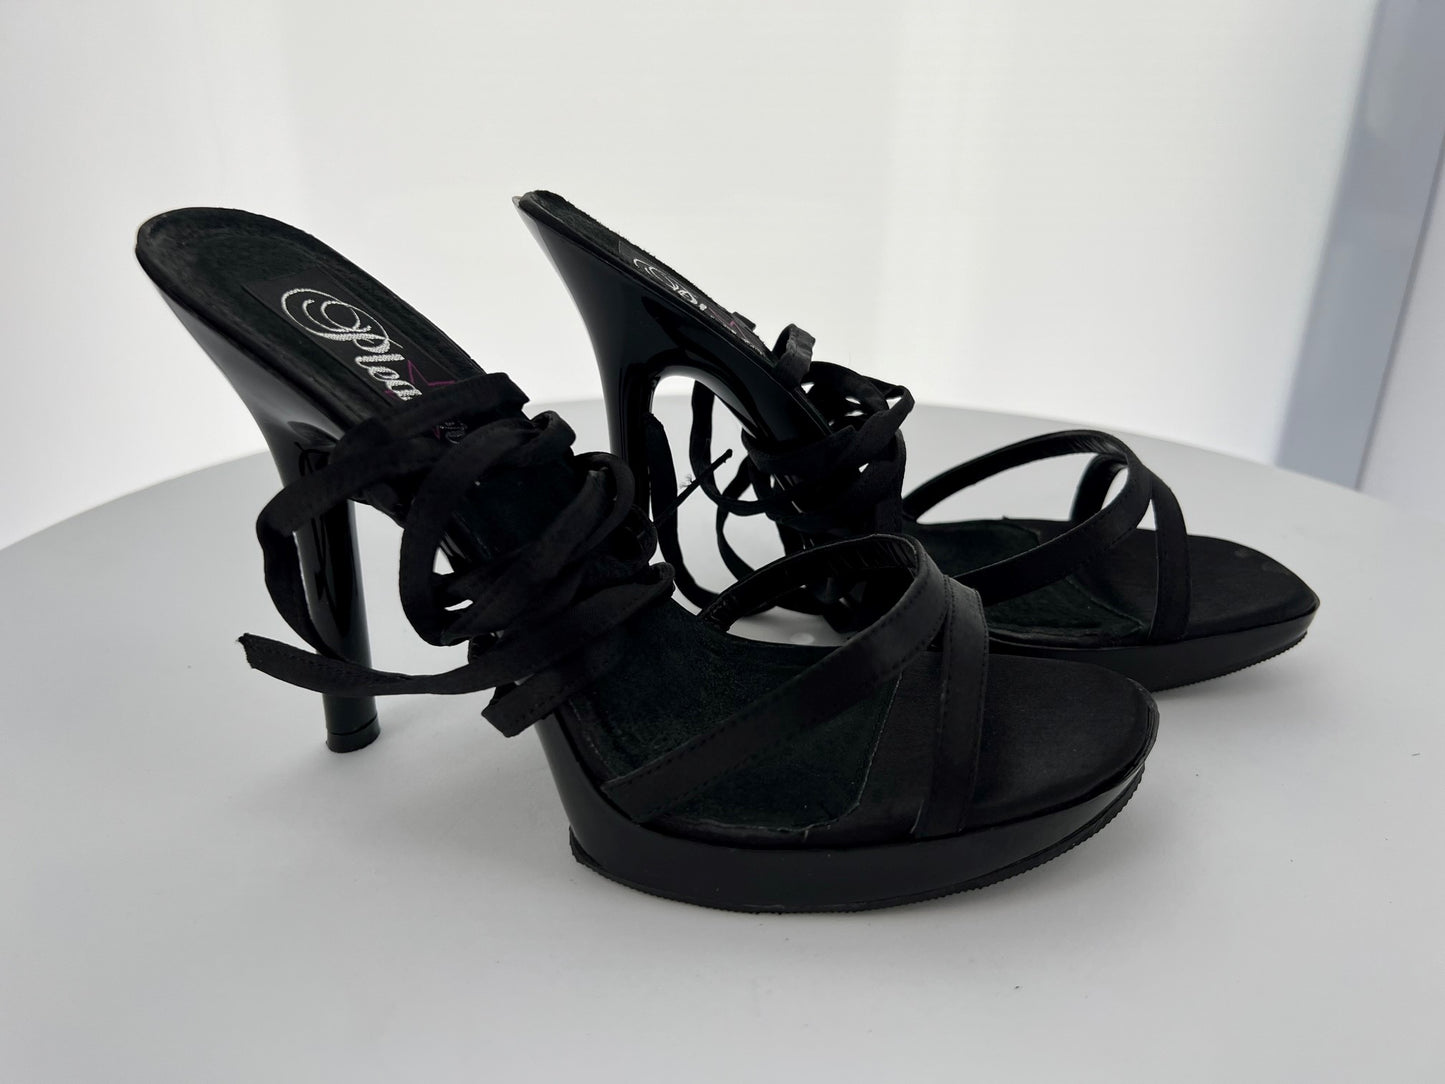 Pleaser VOG39 Black Satin Sexy Shoes Discontinued Sale Stock